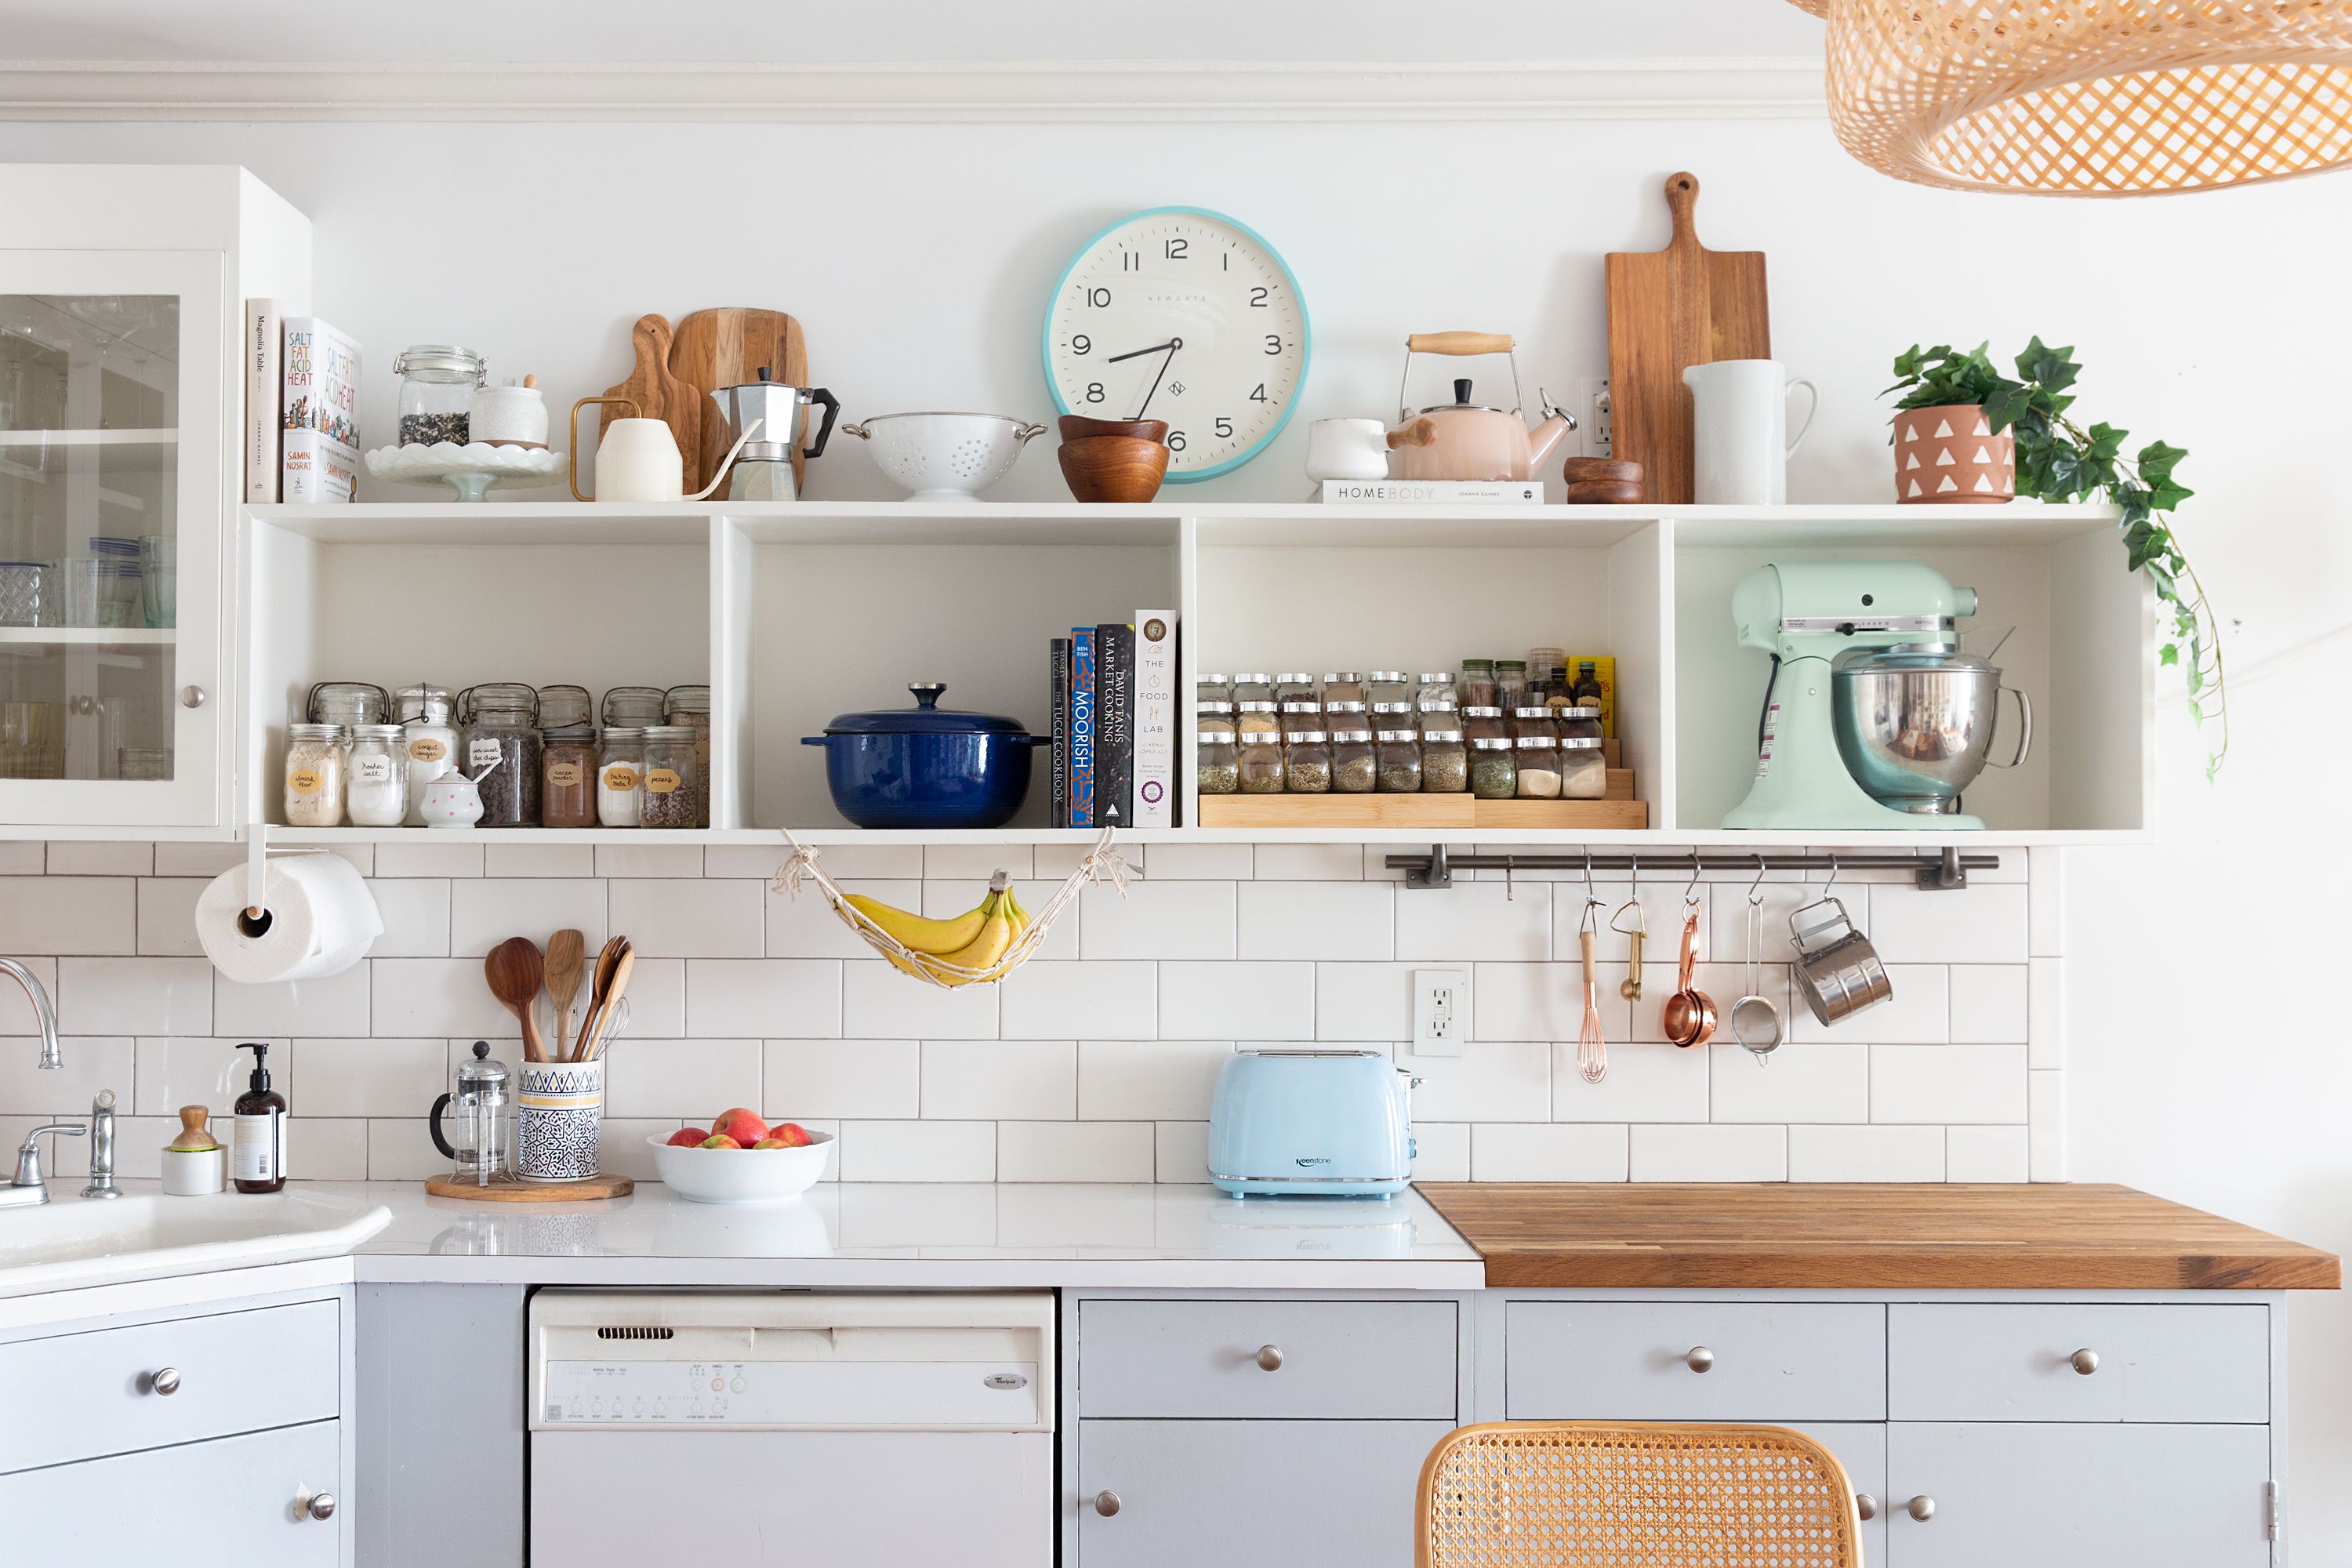 9 New Ways to Decorate Above Your Kitchen Cabinets